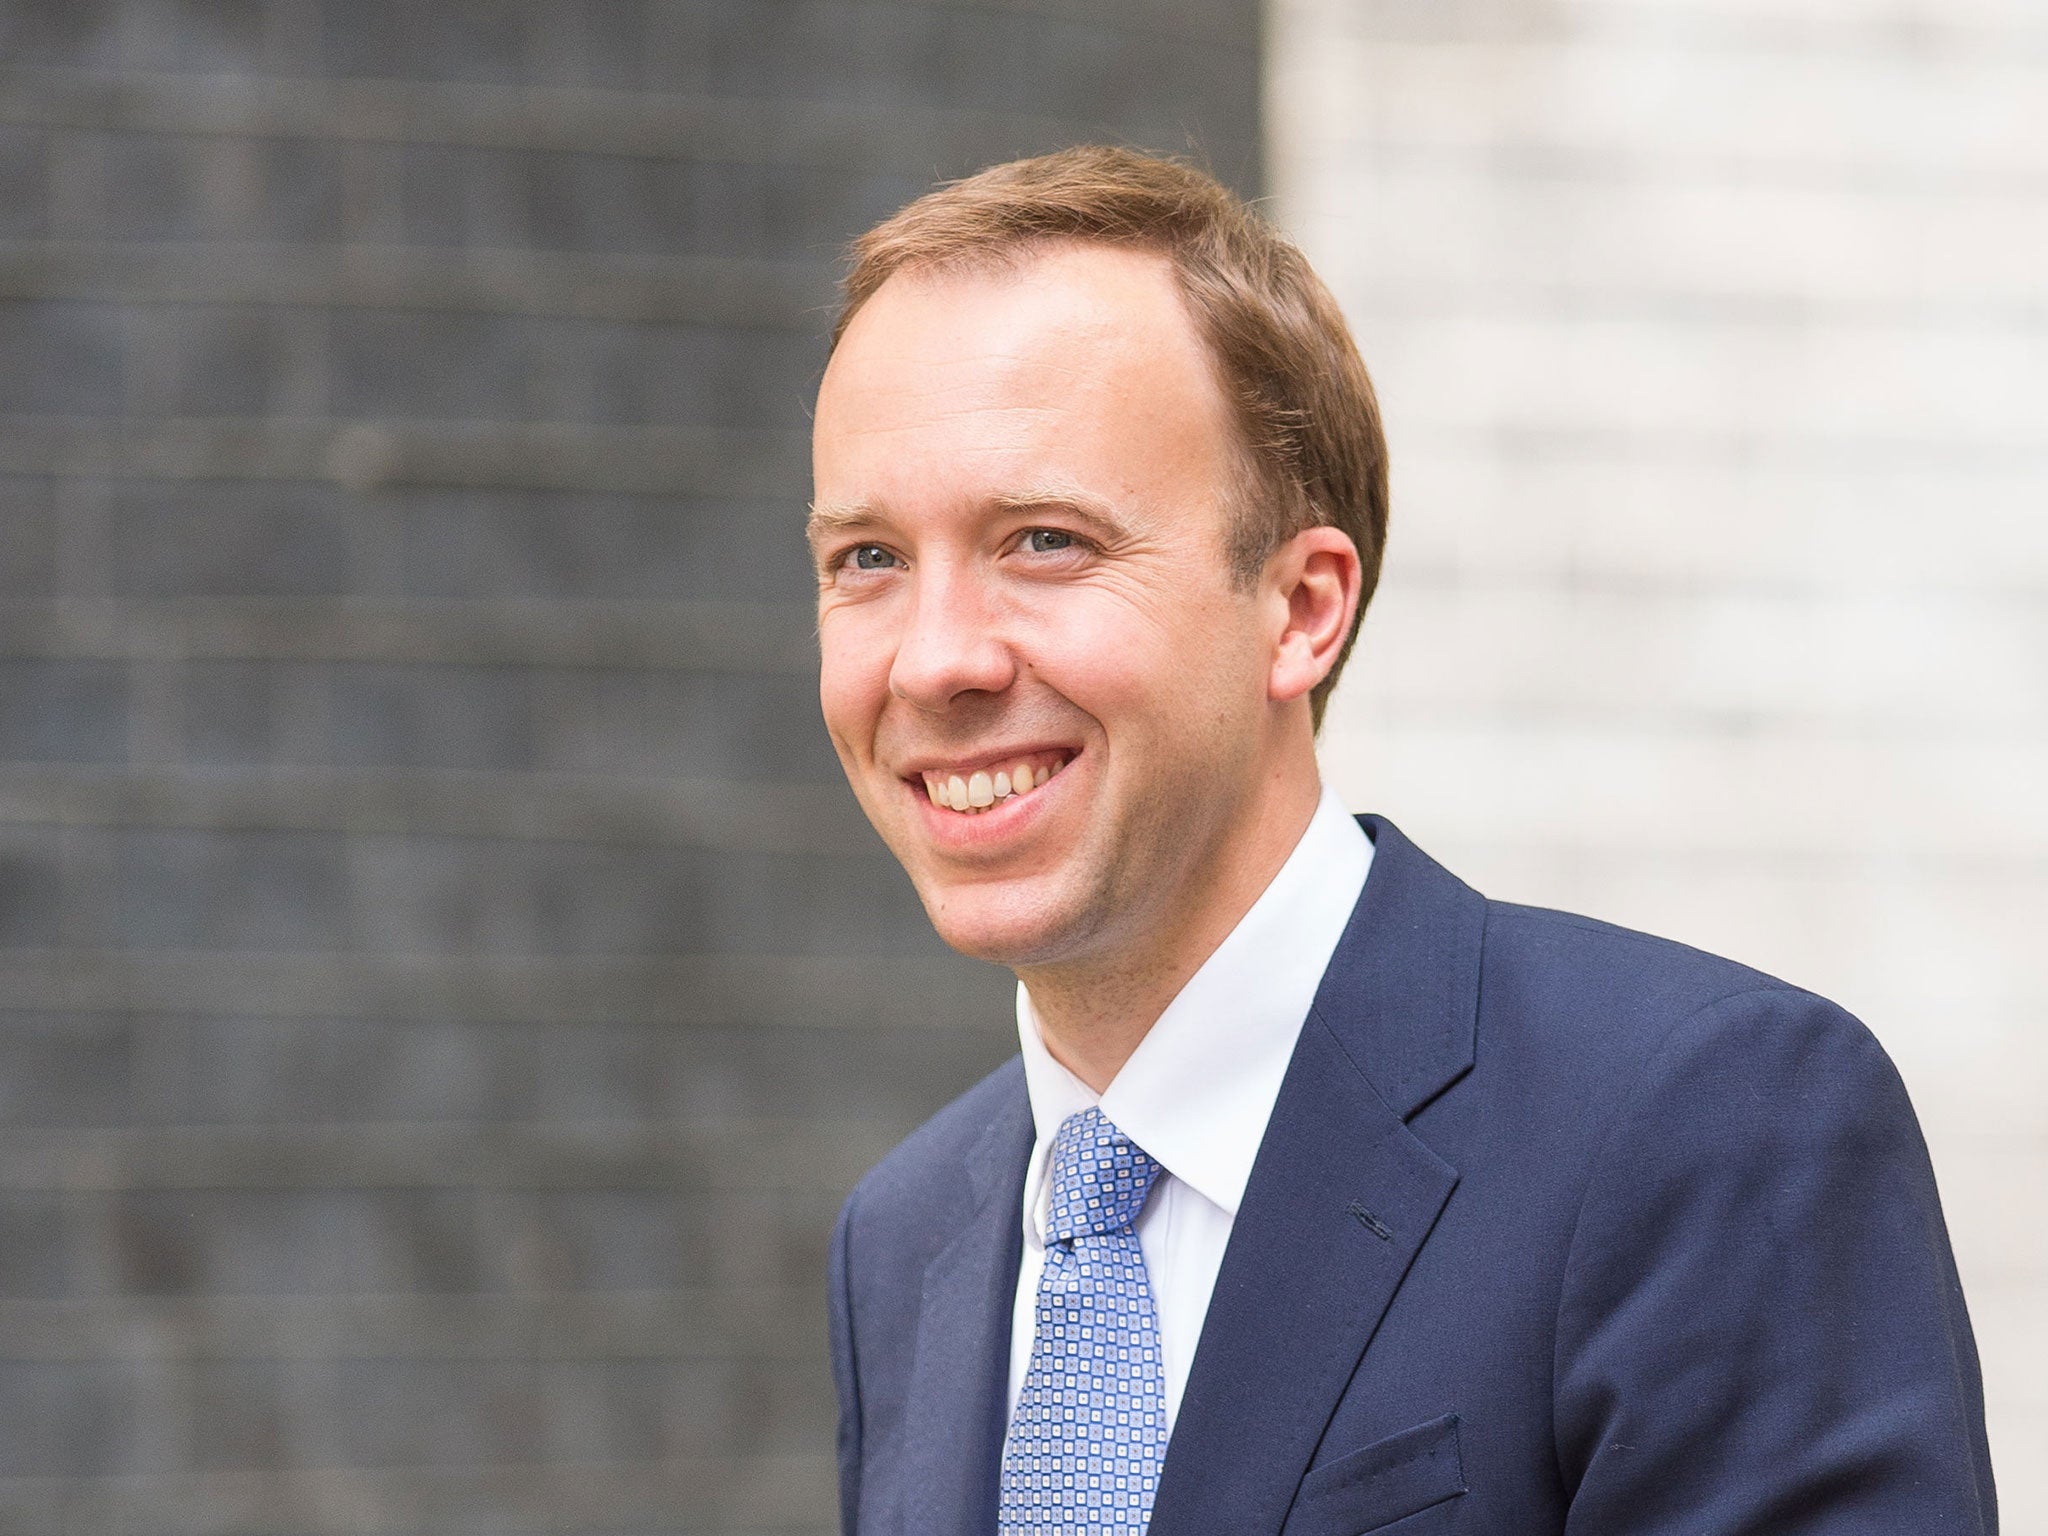 West Suffolk MP, Matthew Hancock who has become Minister for the Cabinet Office